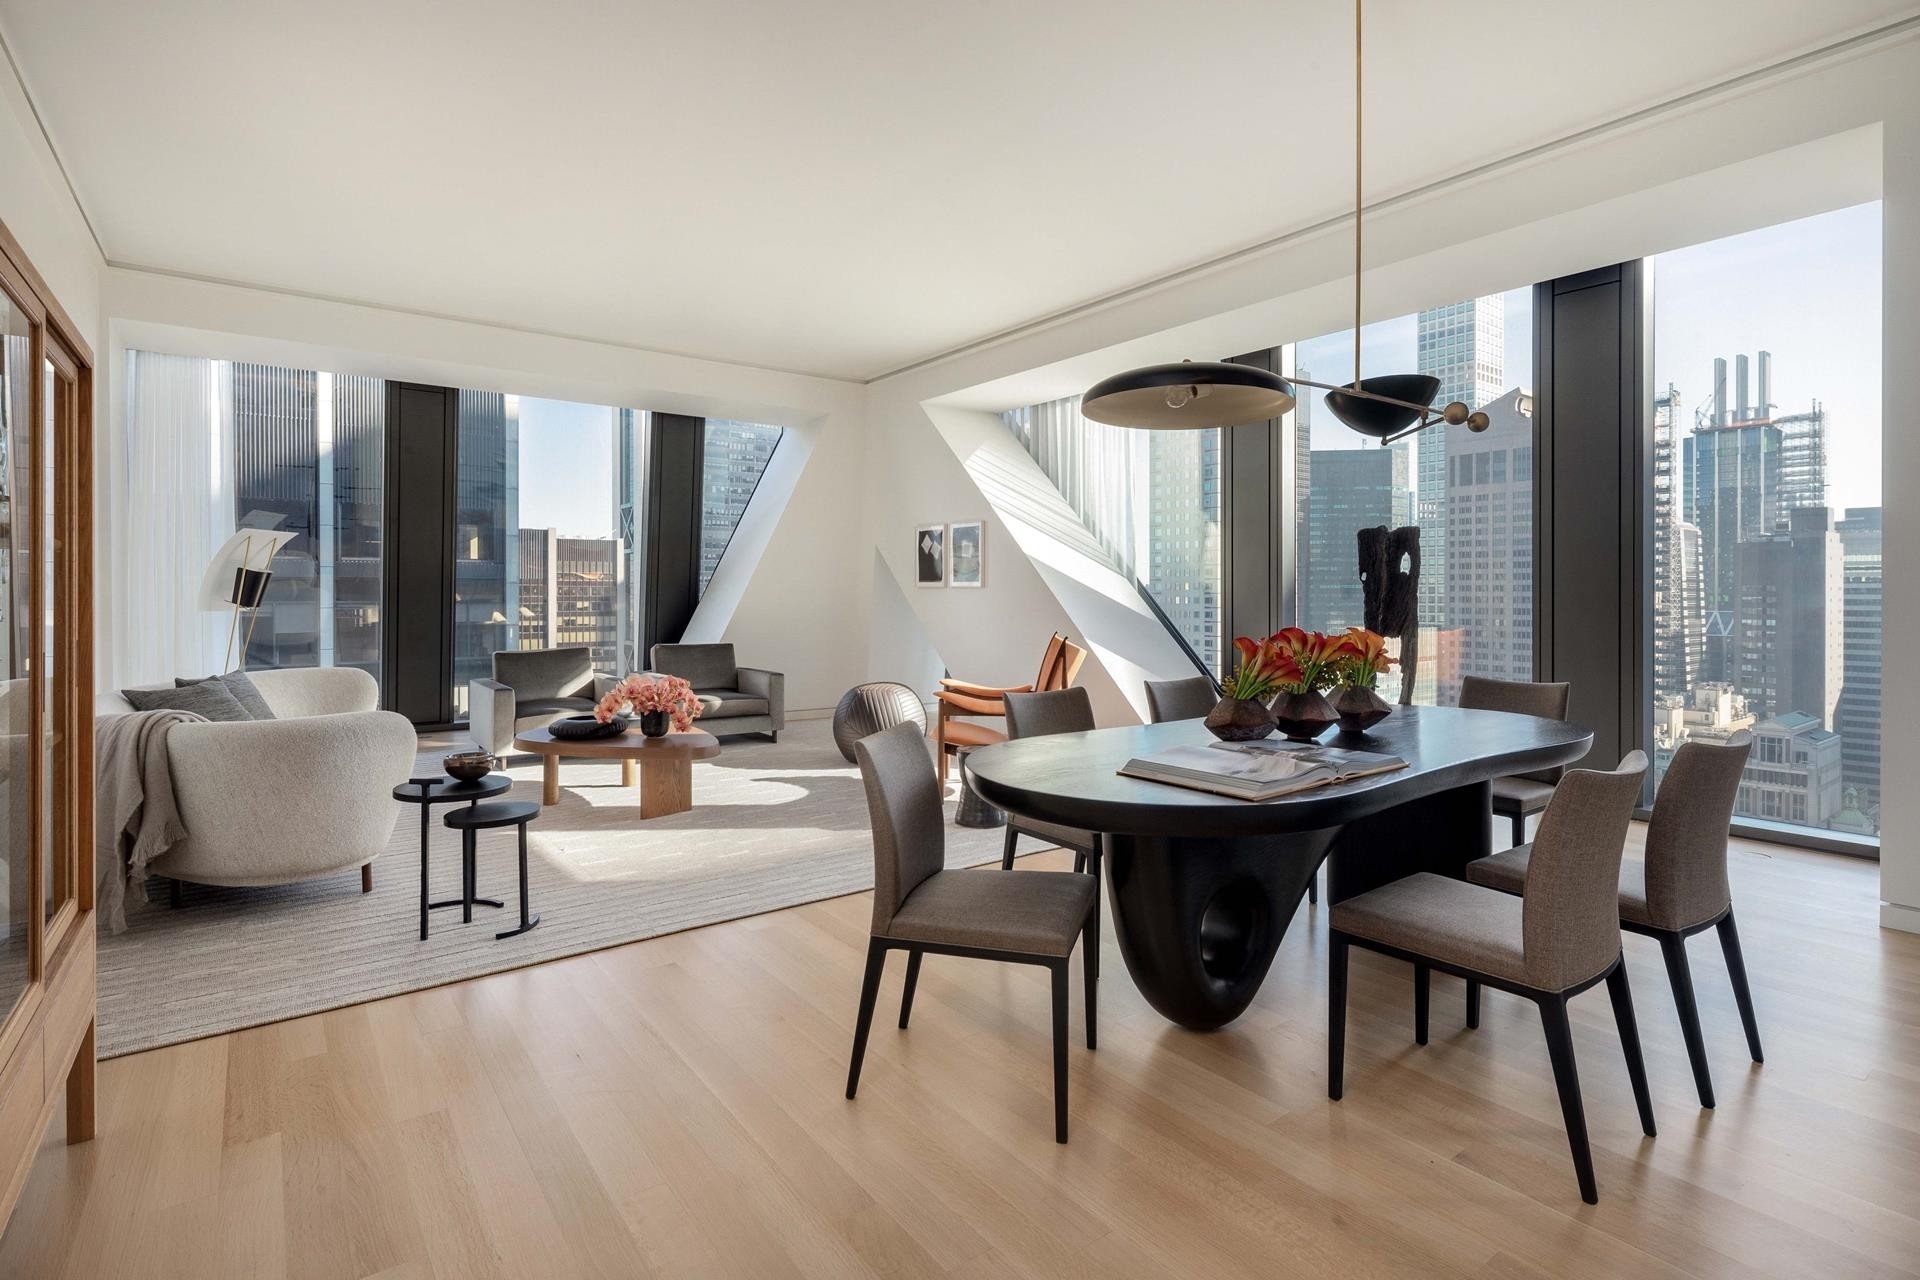 Condominium for Sale at 53W53, 53 53RD ST W, 40A Midtown West, New York, New York 10019